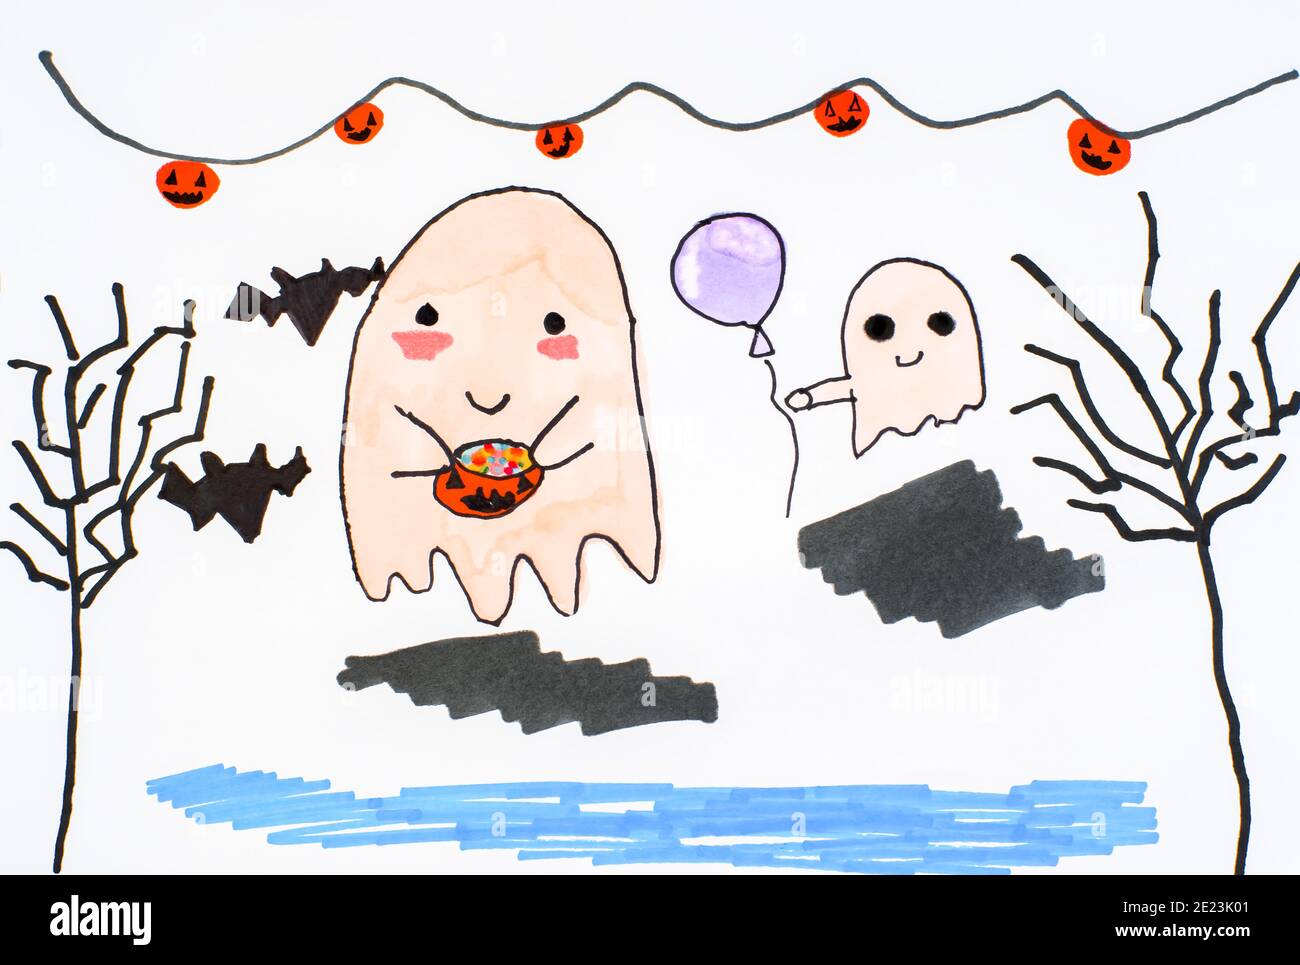 👻HOW TO DRAW A GHOST (HALLOWEEN) 👻 - HALLOWEEN DRAWINGS 